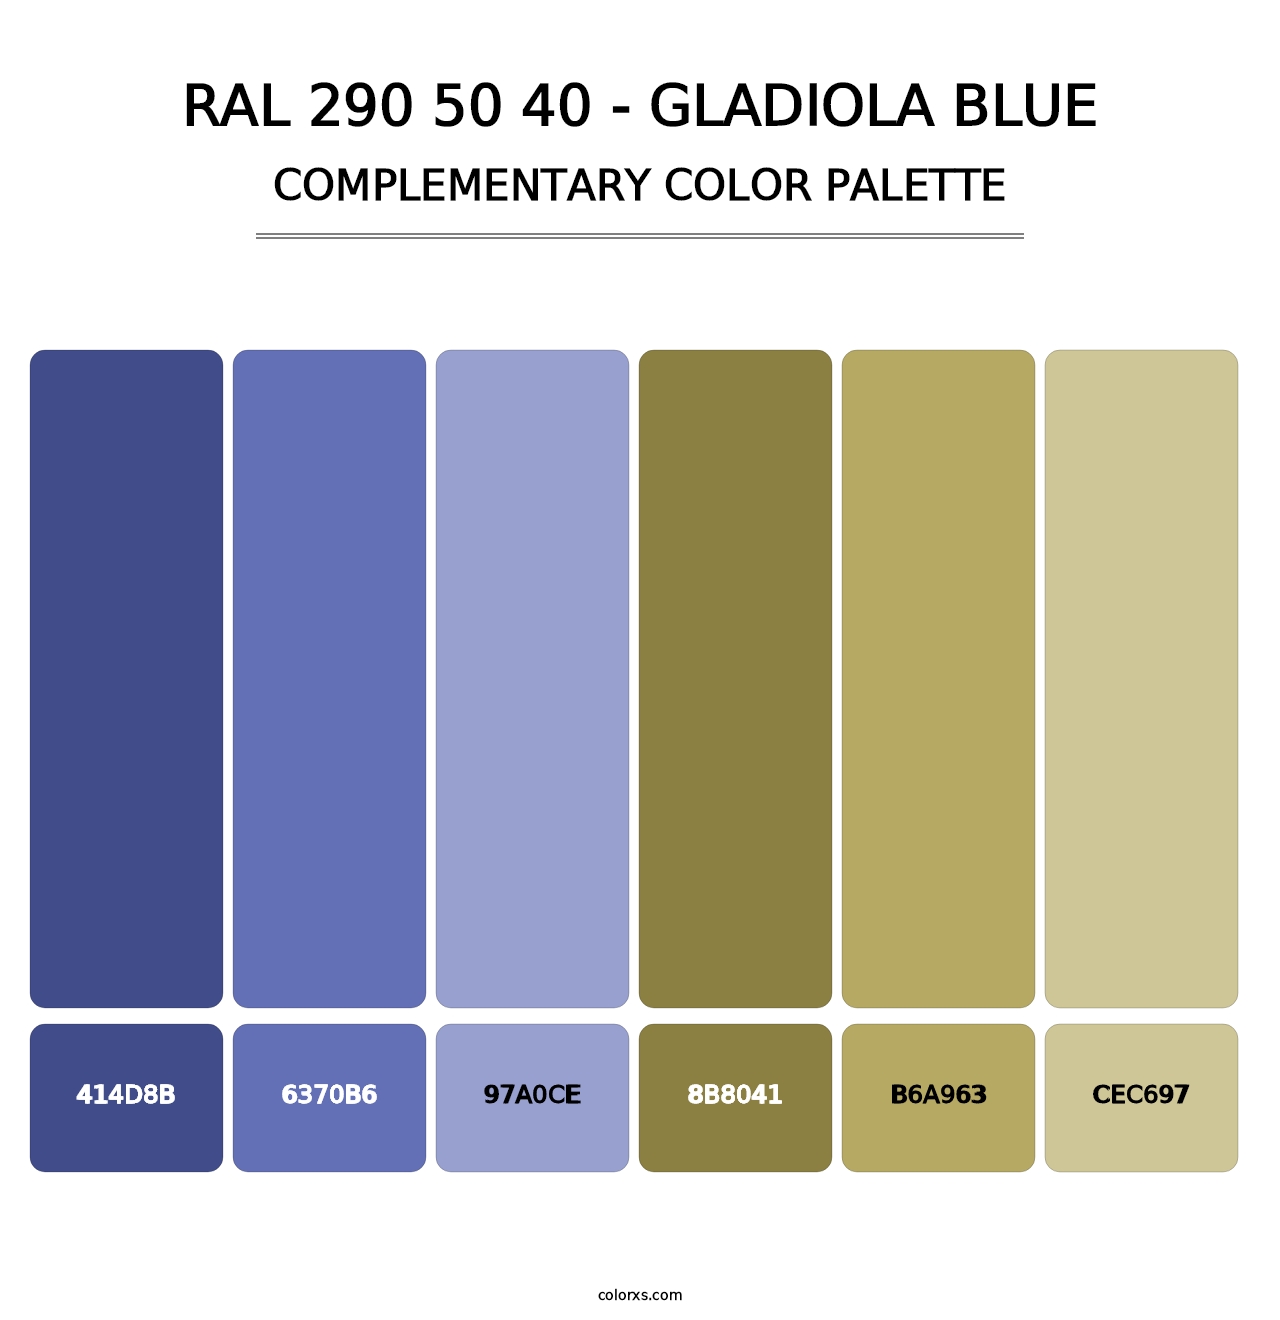 RAL 290 50 40 - Gladiola Blue - Complementary Color Palette